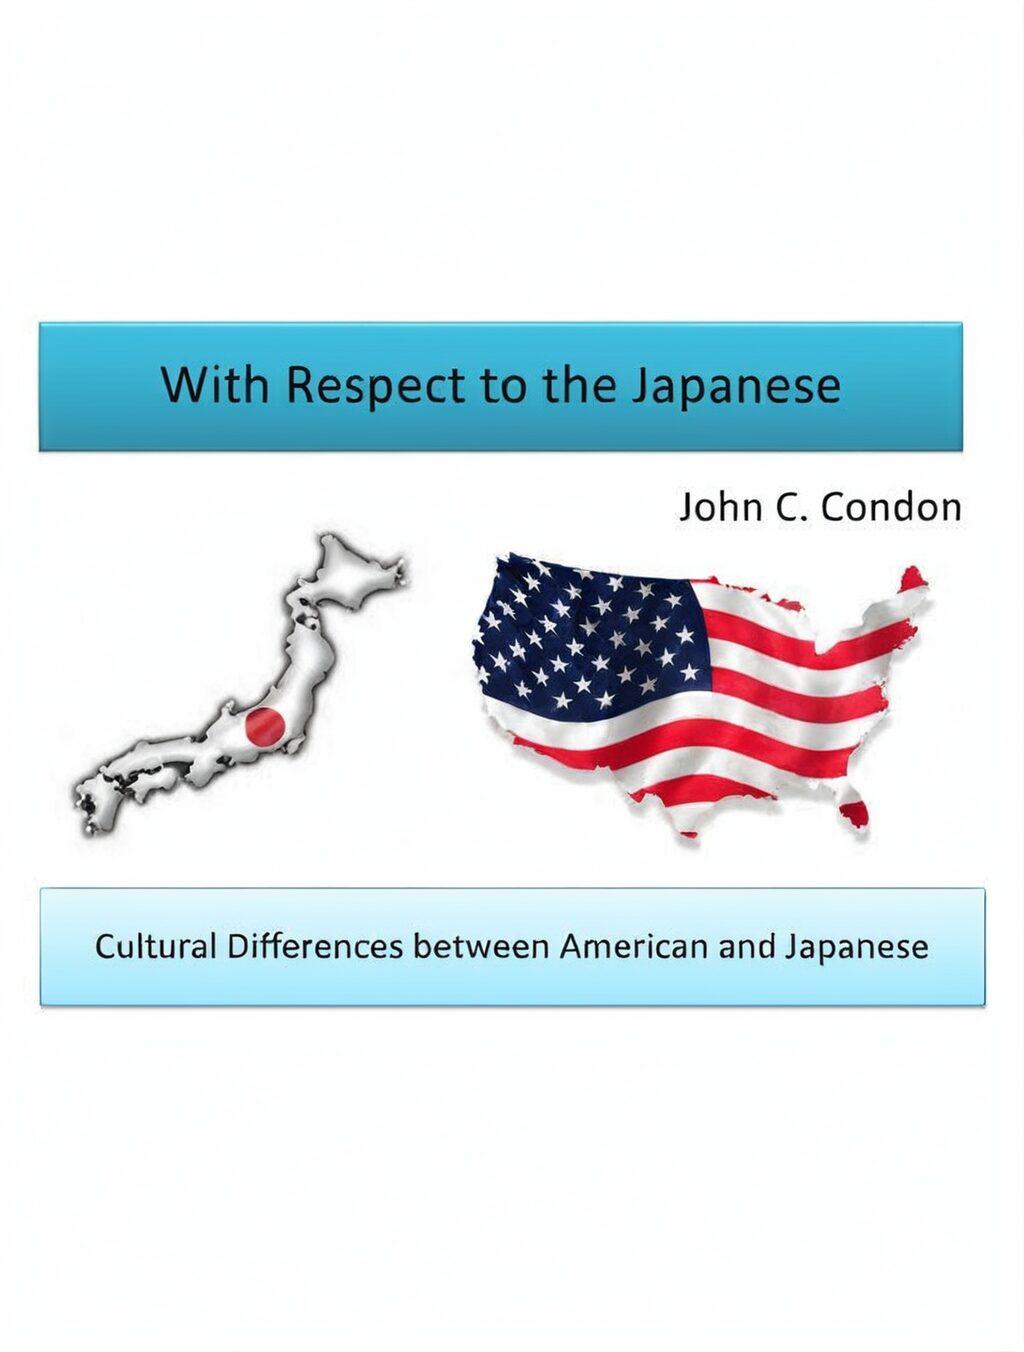 japanese culture compared to american culture